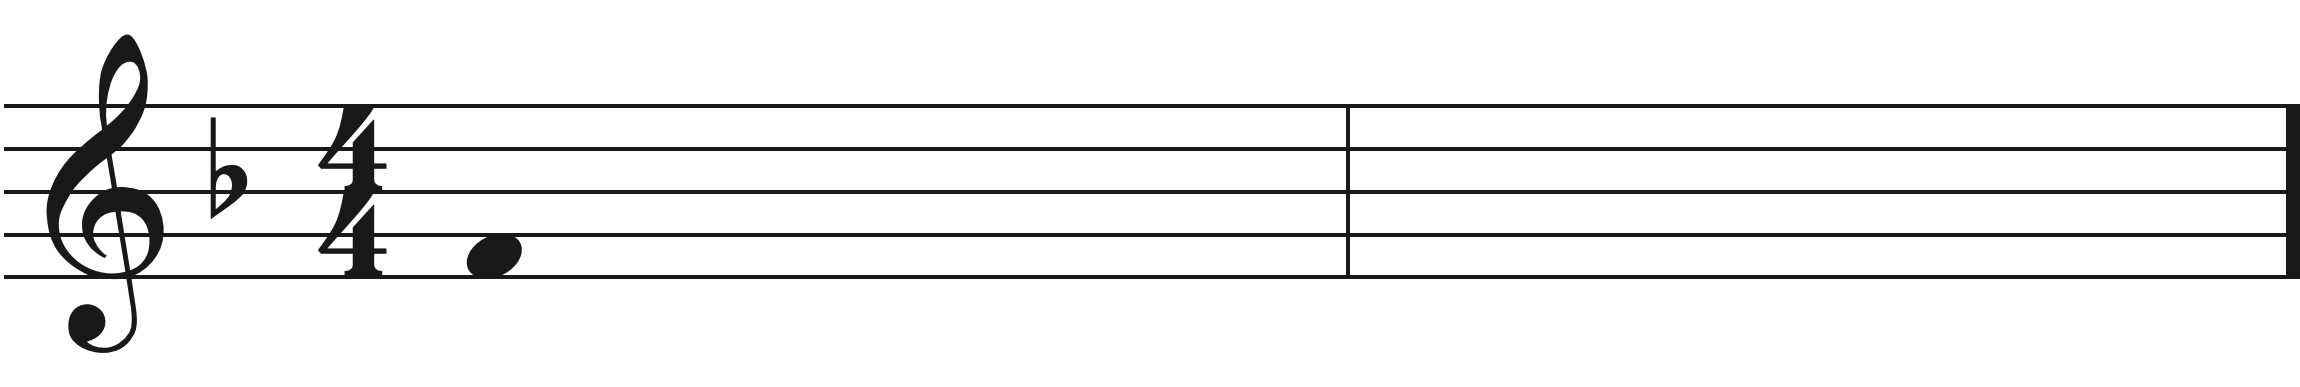 Melodic Sequences Aural Training exercise example1